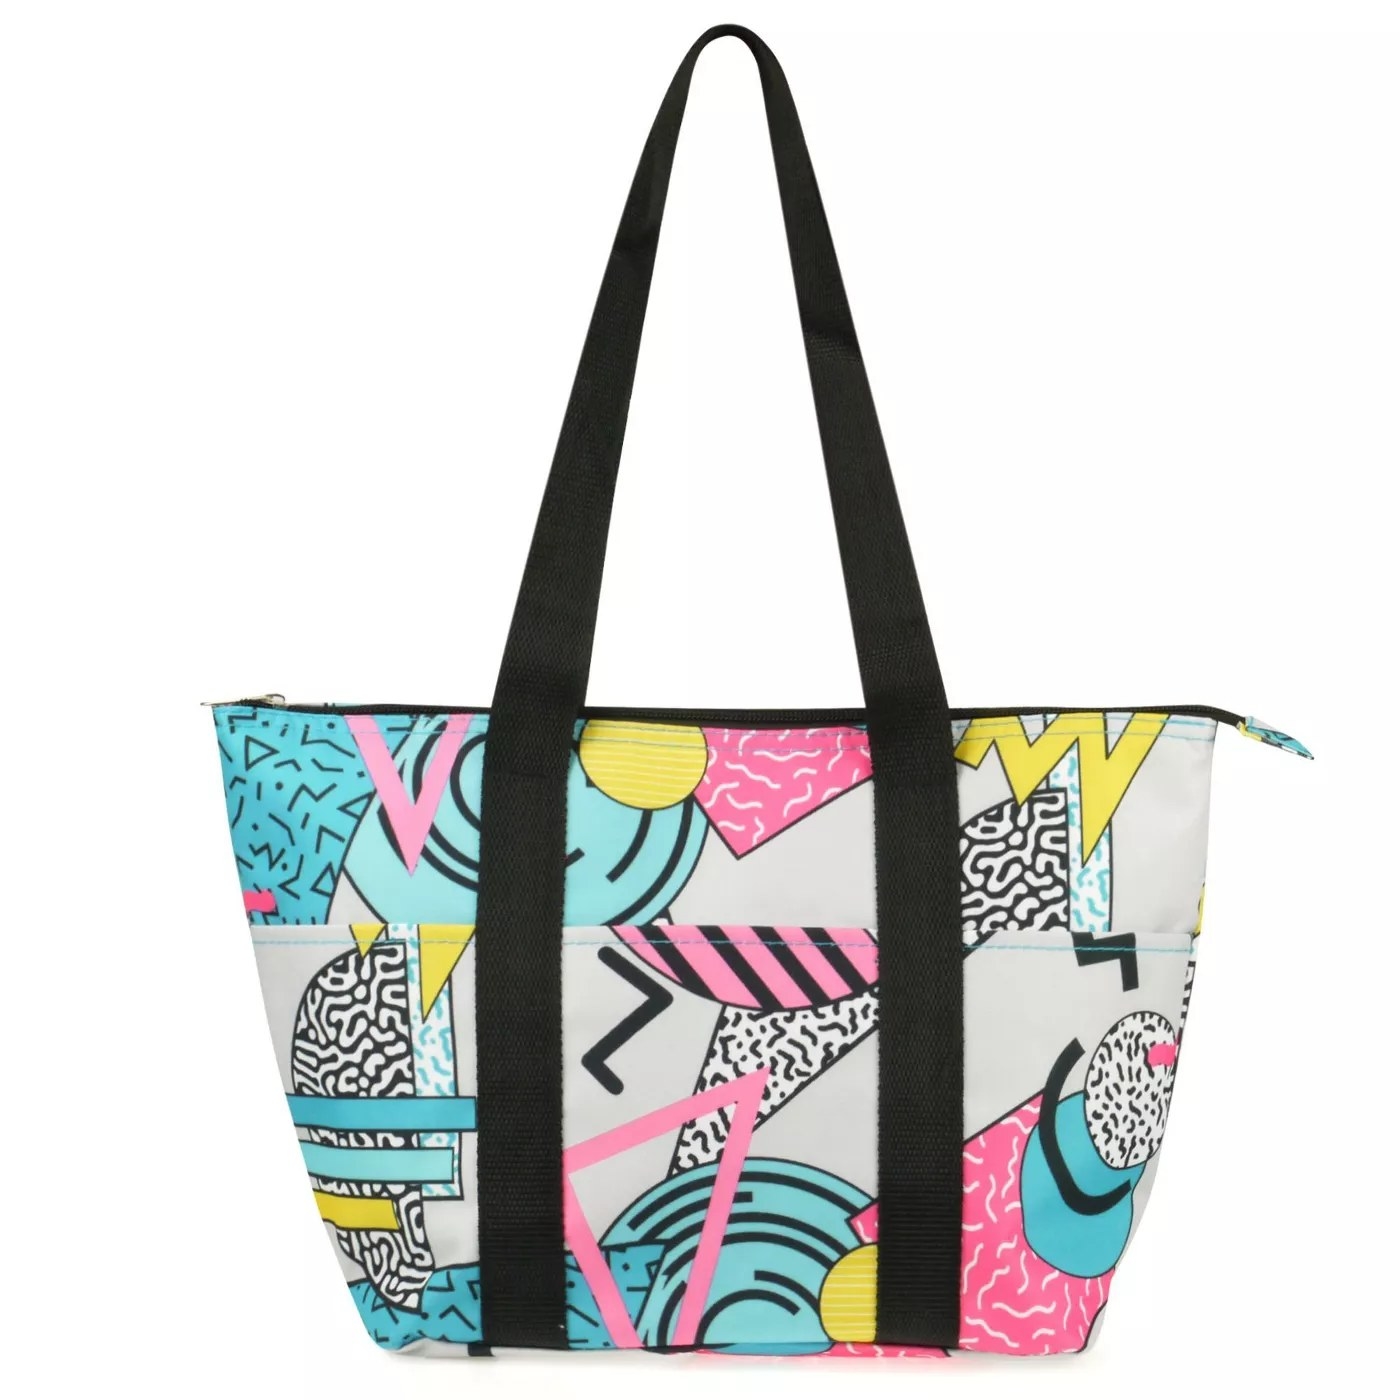 The tote bag in the geometric colorway pattern